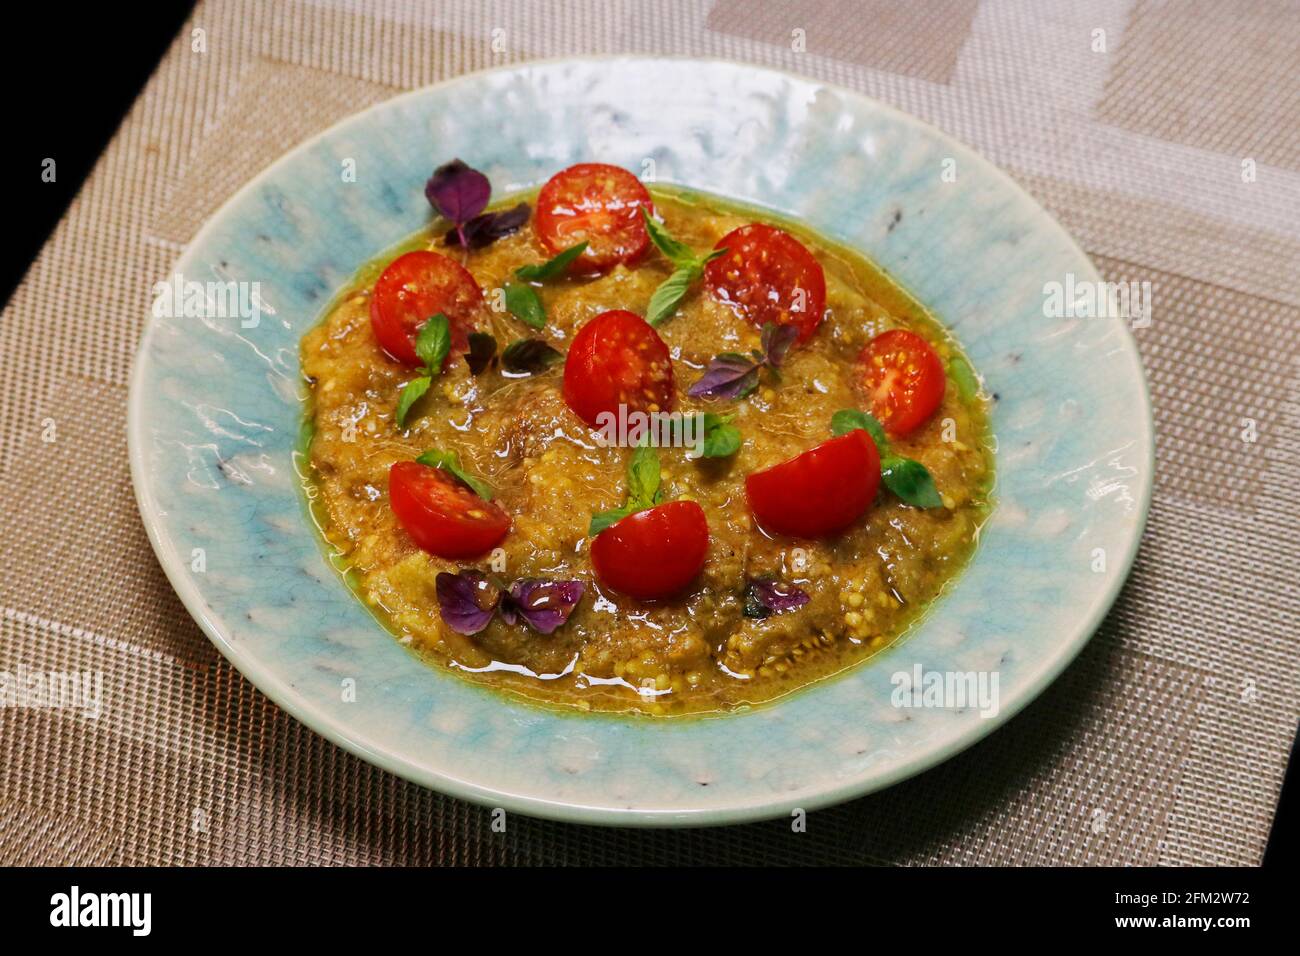 smoked aubergine or eggplant and cherry tomato salad, middle eastern food Stock Photo